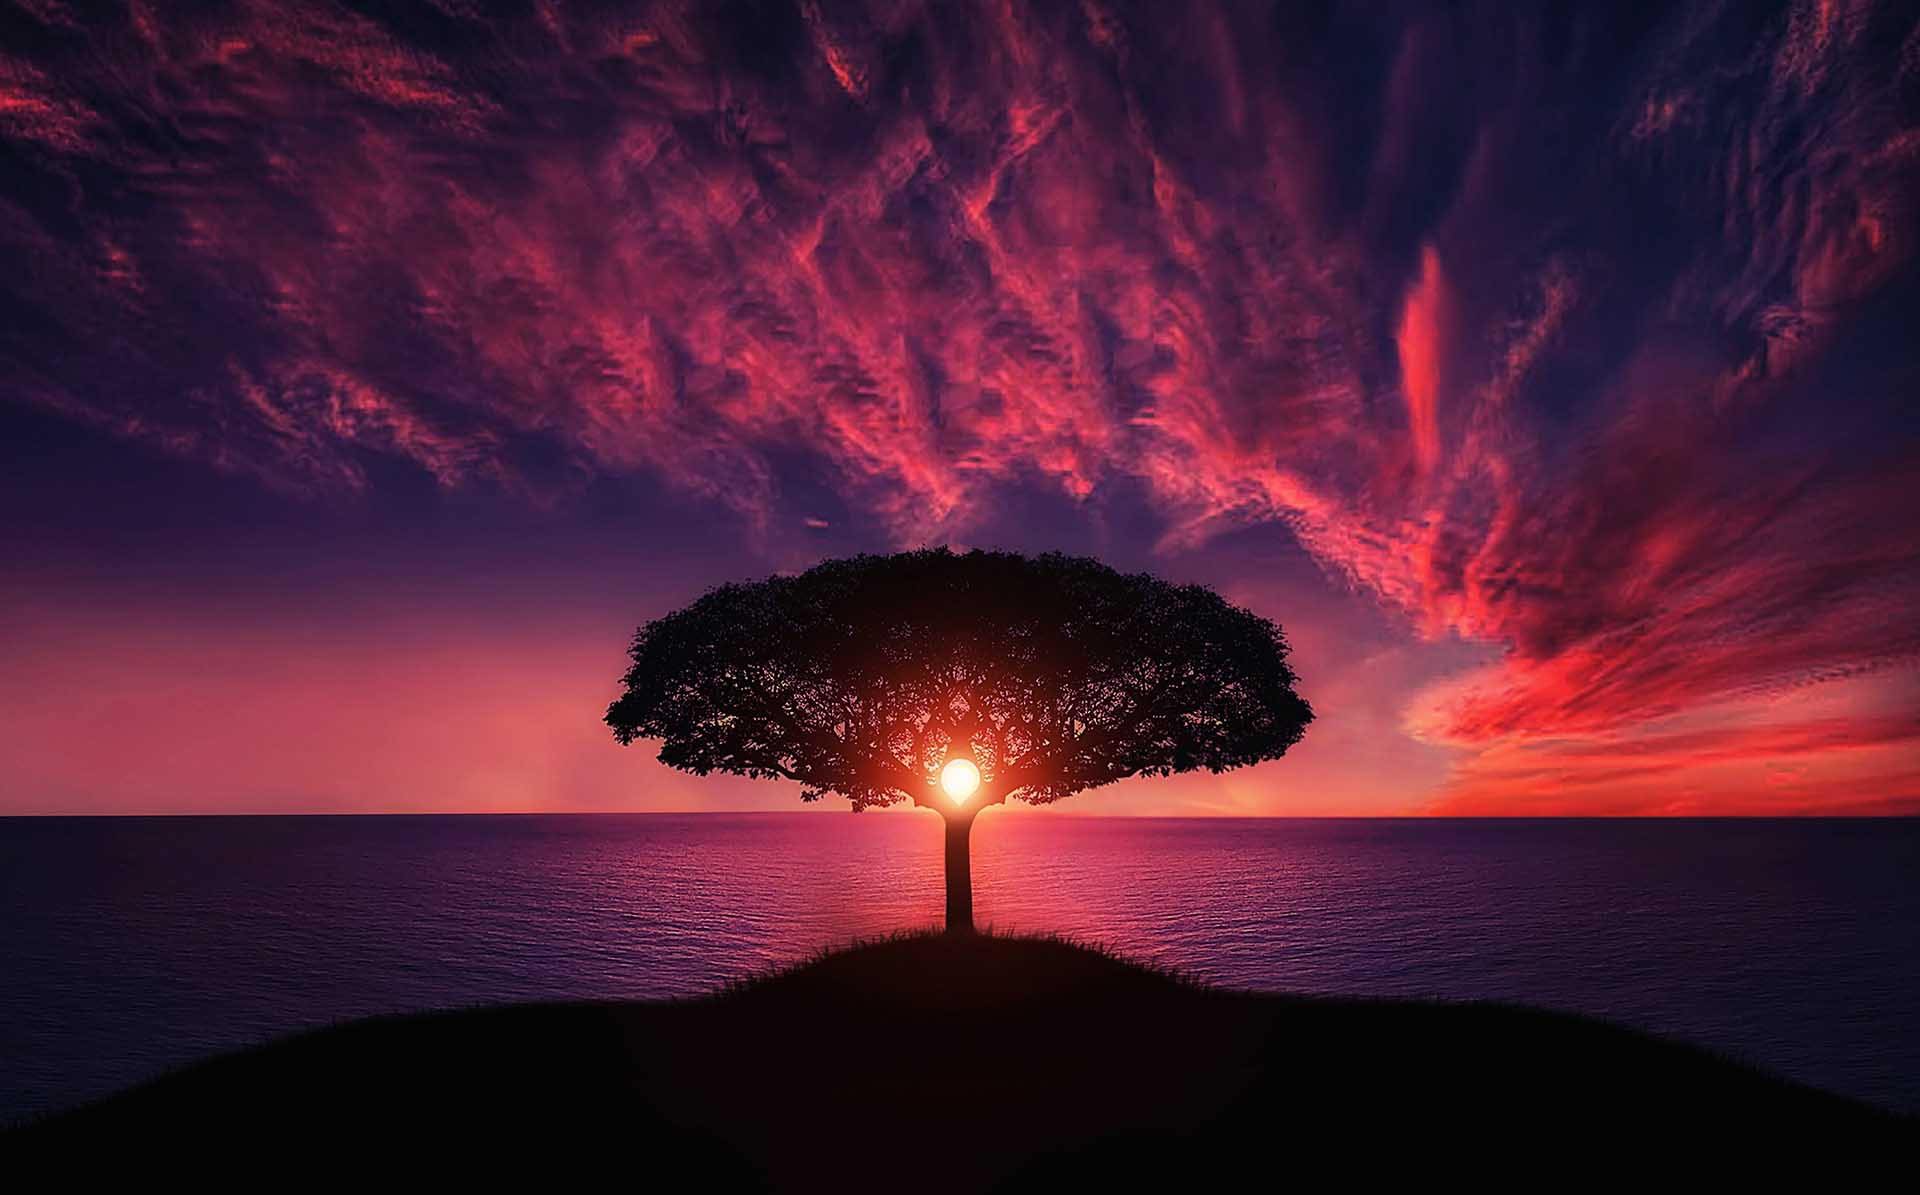 Cover image of a tree with the sun behind it and a sunset for article on creative nature photography